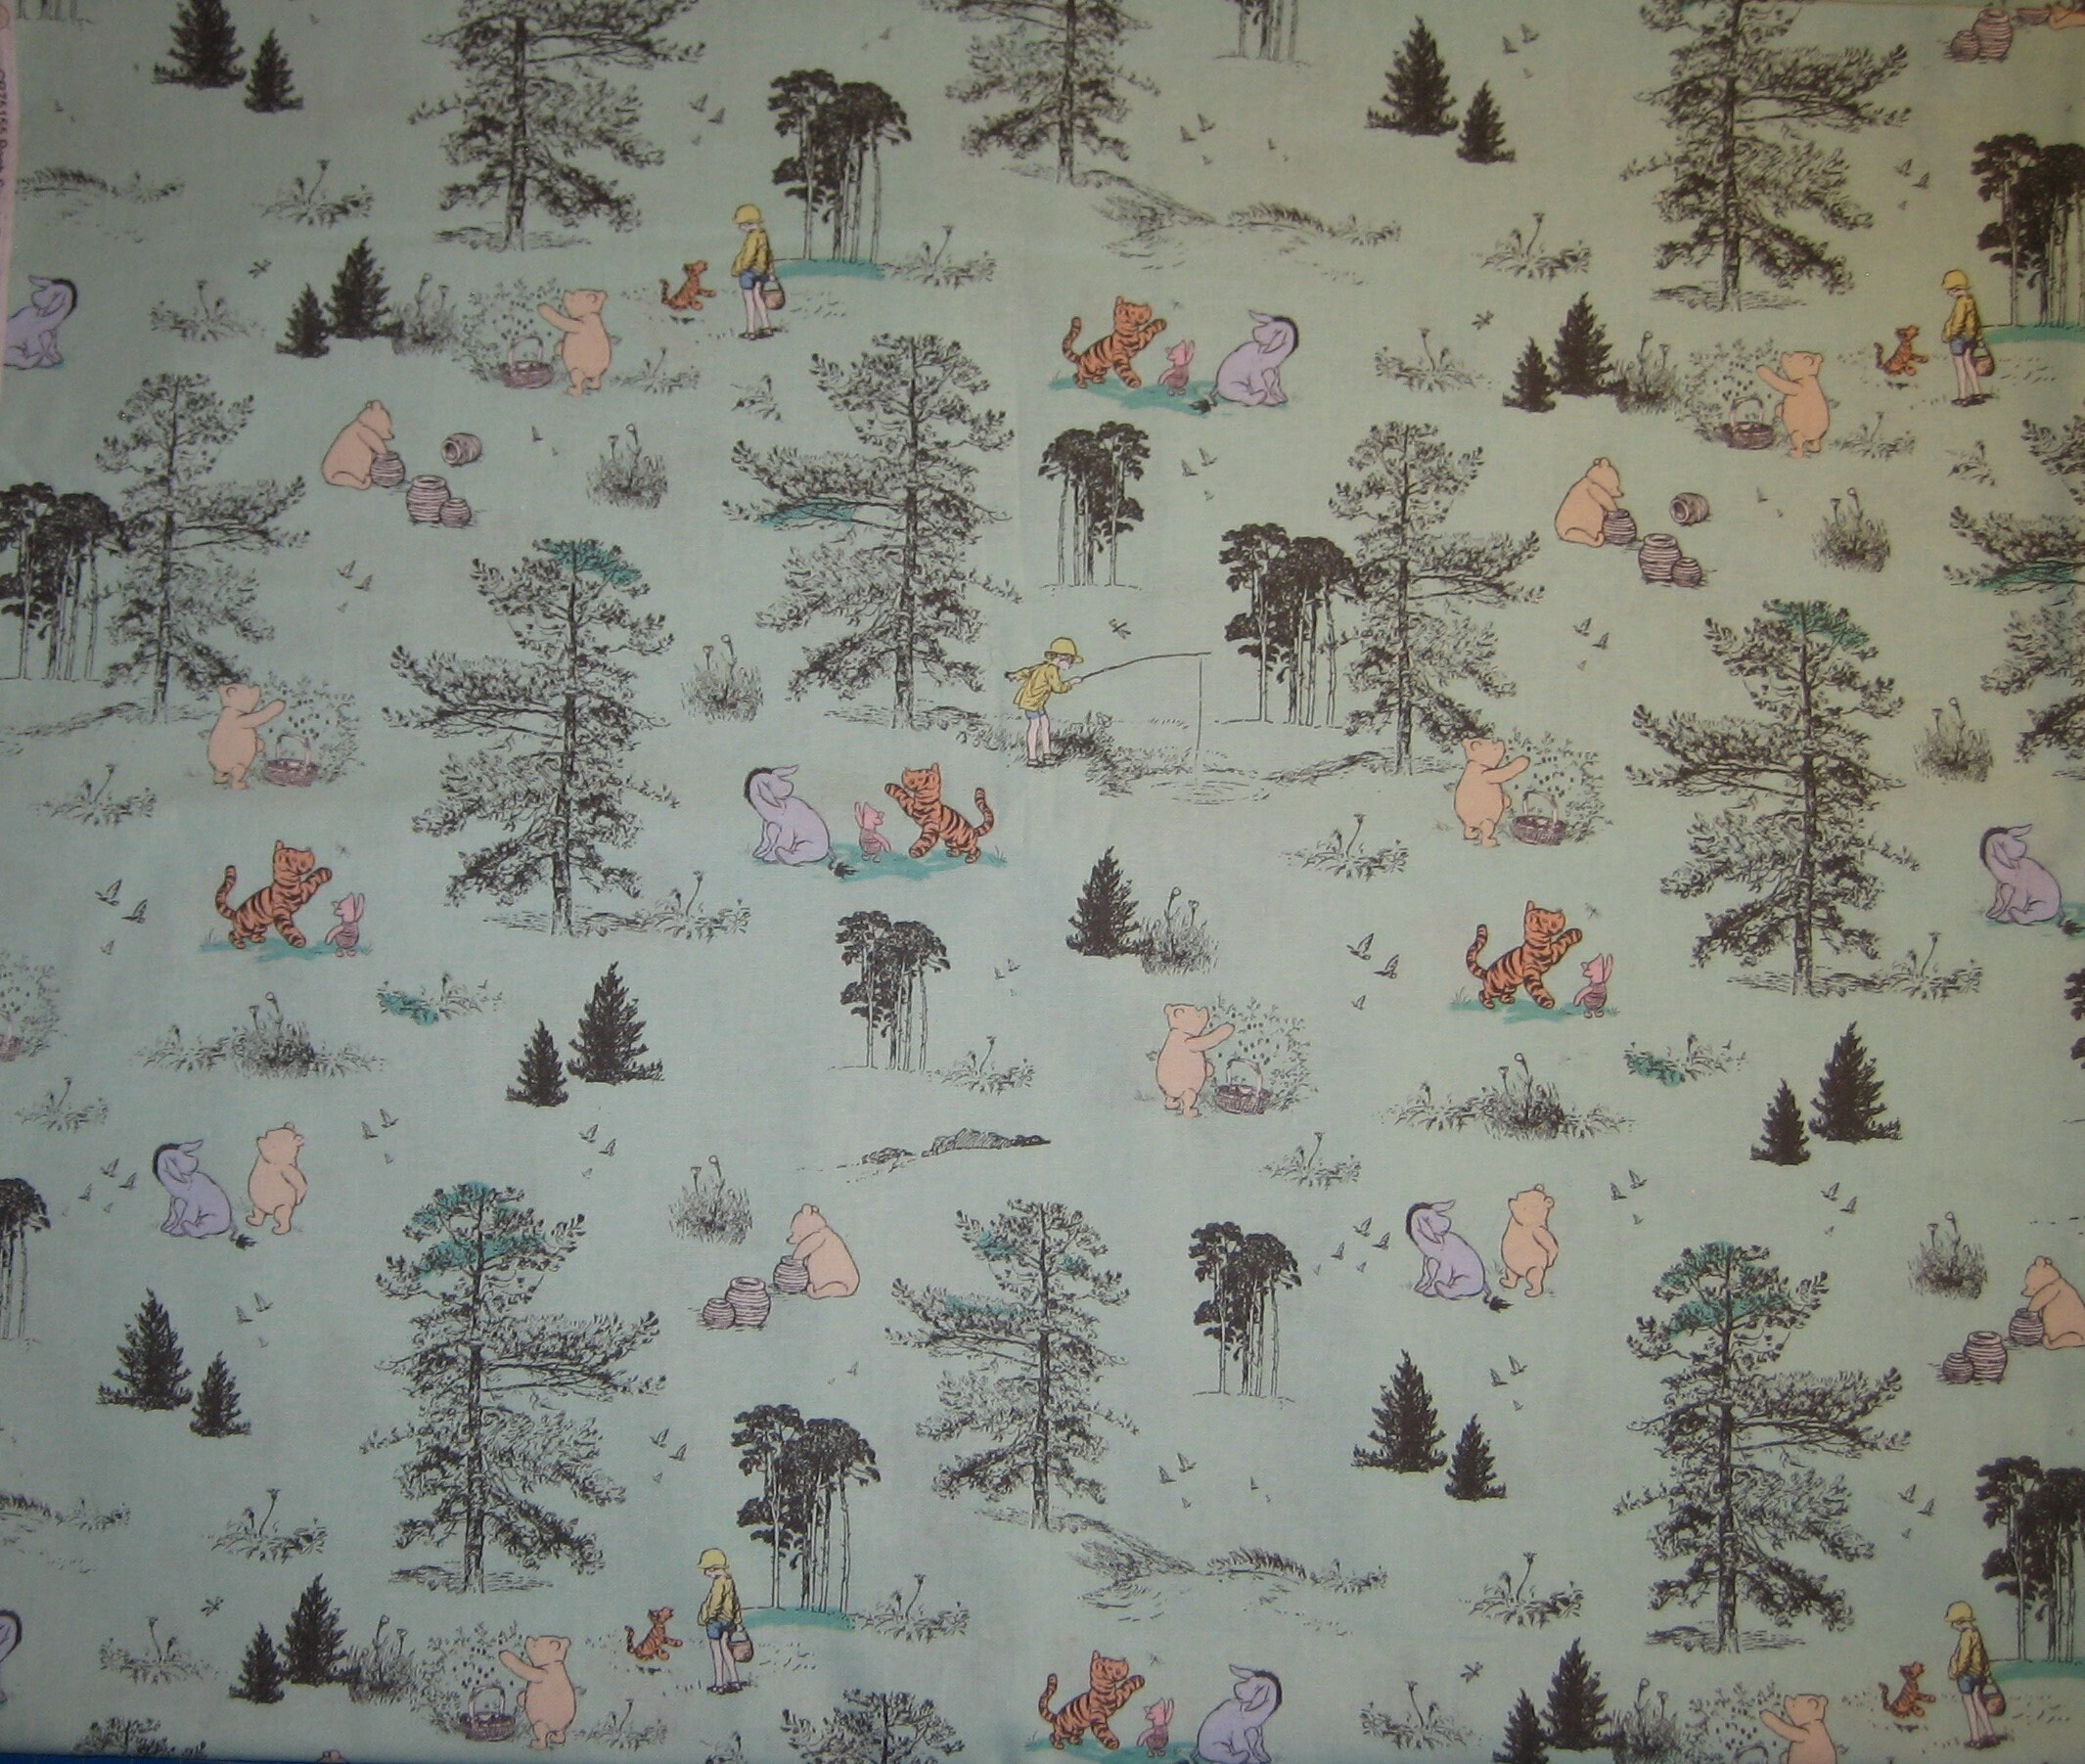  Disney Winnie The Pooh Fabric Wonder and Whimsy Silhouette Lace  in Blue Premium Quality Cotton Fabric by The Yard : Arts, Crafts & Sewing